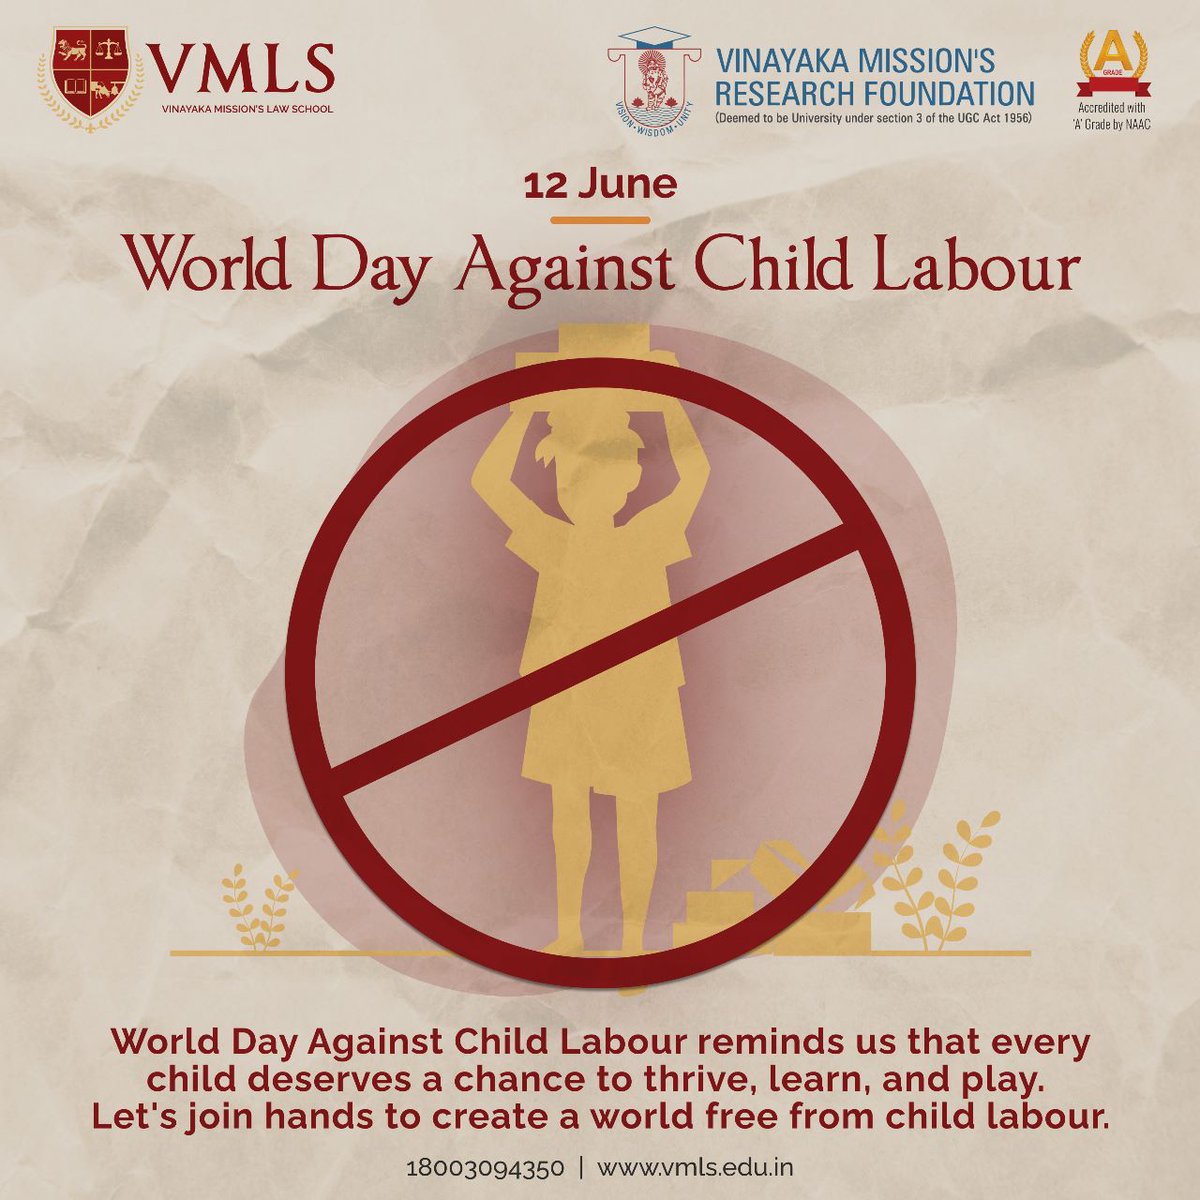 World Day Against Child Labour reminds us that every child deserves a chance to thrive, learn, and play. Let's join hands to create a world free from child labour.

#worlddayagainstchildlabour #vmlslawcollege #bballb #bcomllb #llb #lawcollege #lawinstitute